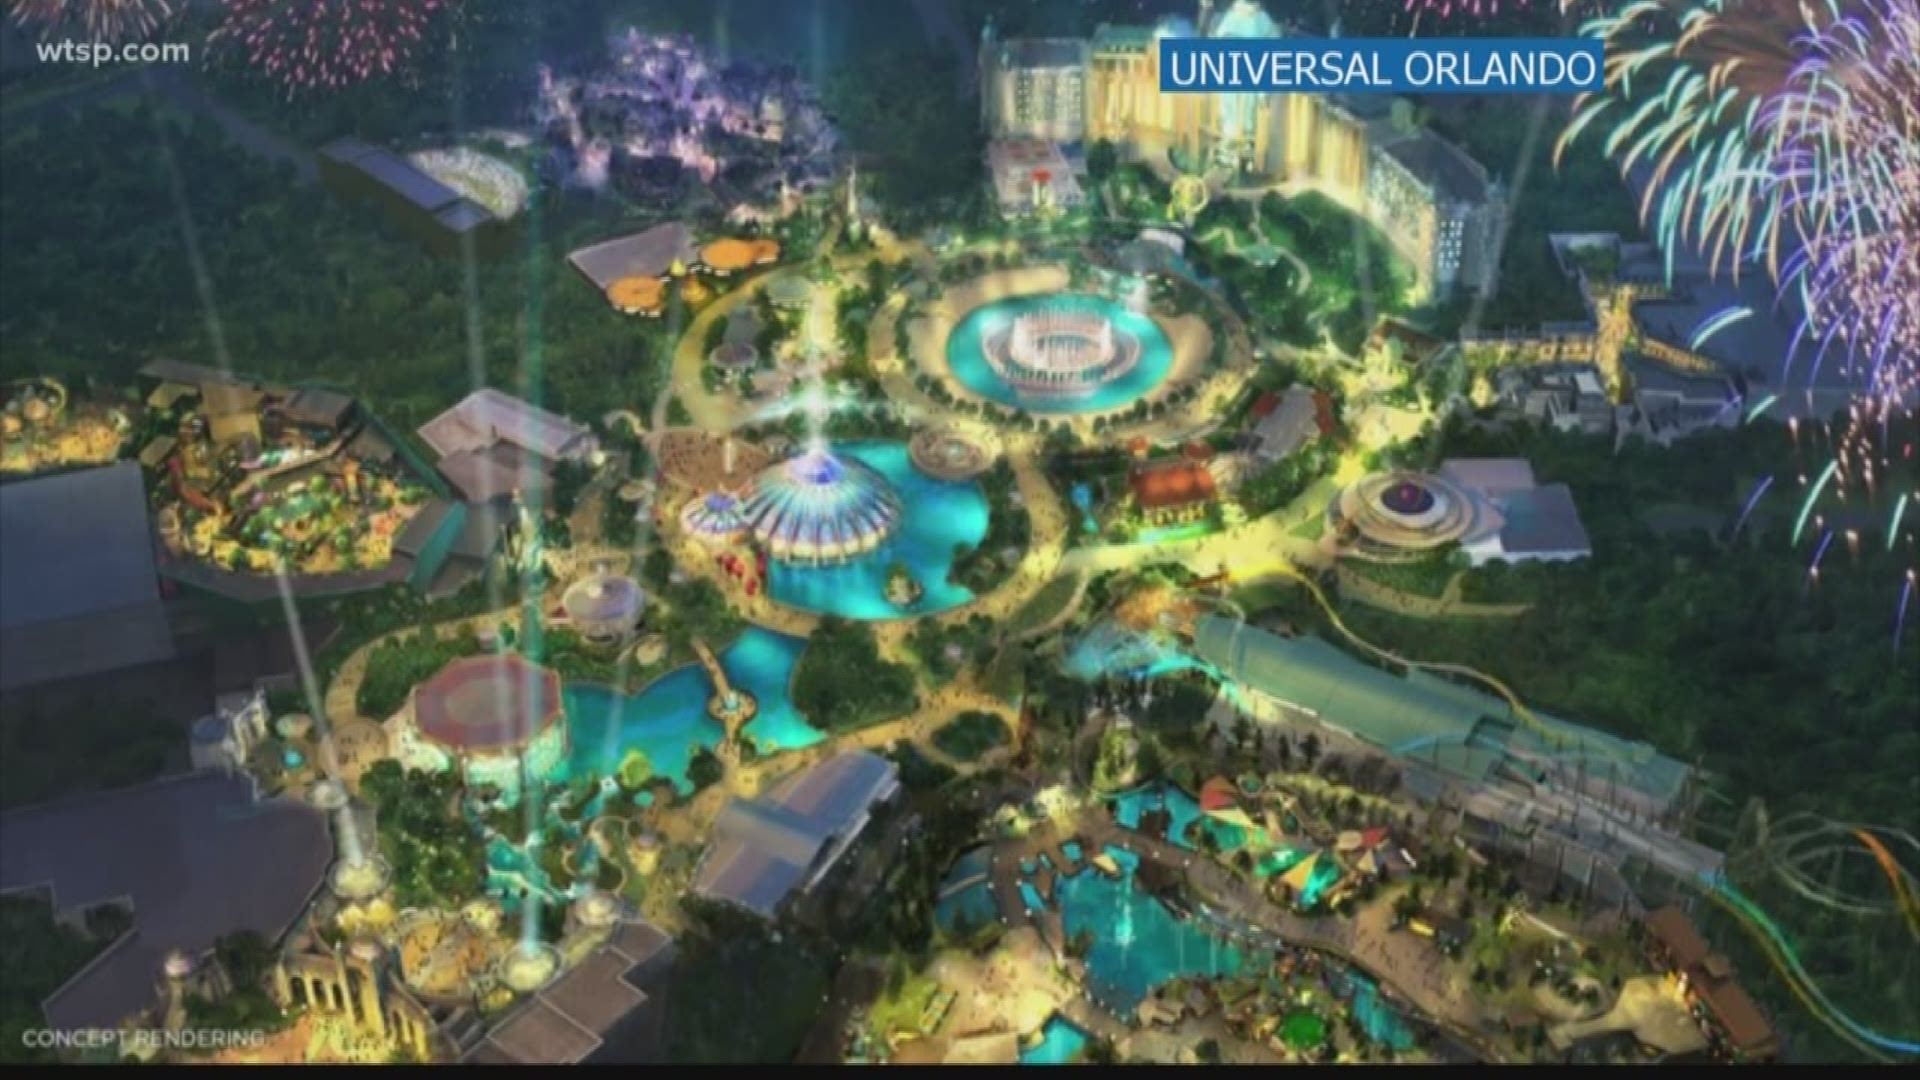 Universal Orlando is building a new theme park: Universal's Epic Universe.

At a Thursday morning news conference, the company announced the new park will be the largest investment in one of its theme parks.

Universal said the new theme park will be on a large swath of land near the Orange County Convention Center. According to property records, Universal Creative Partners own more than 500 acres near the convention center.